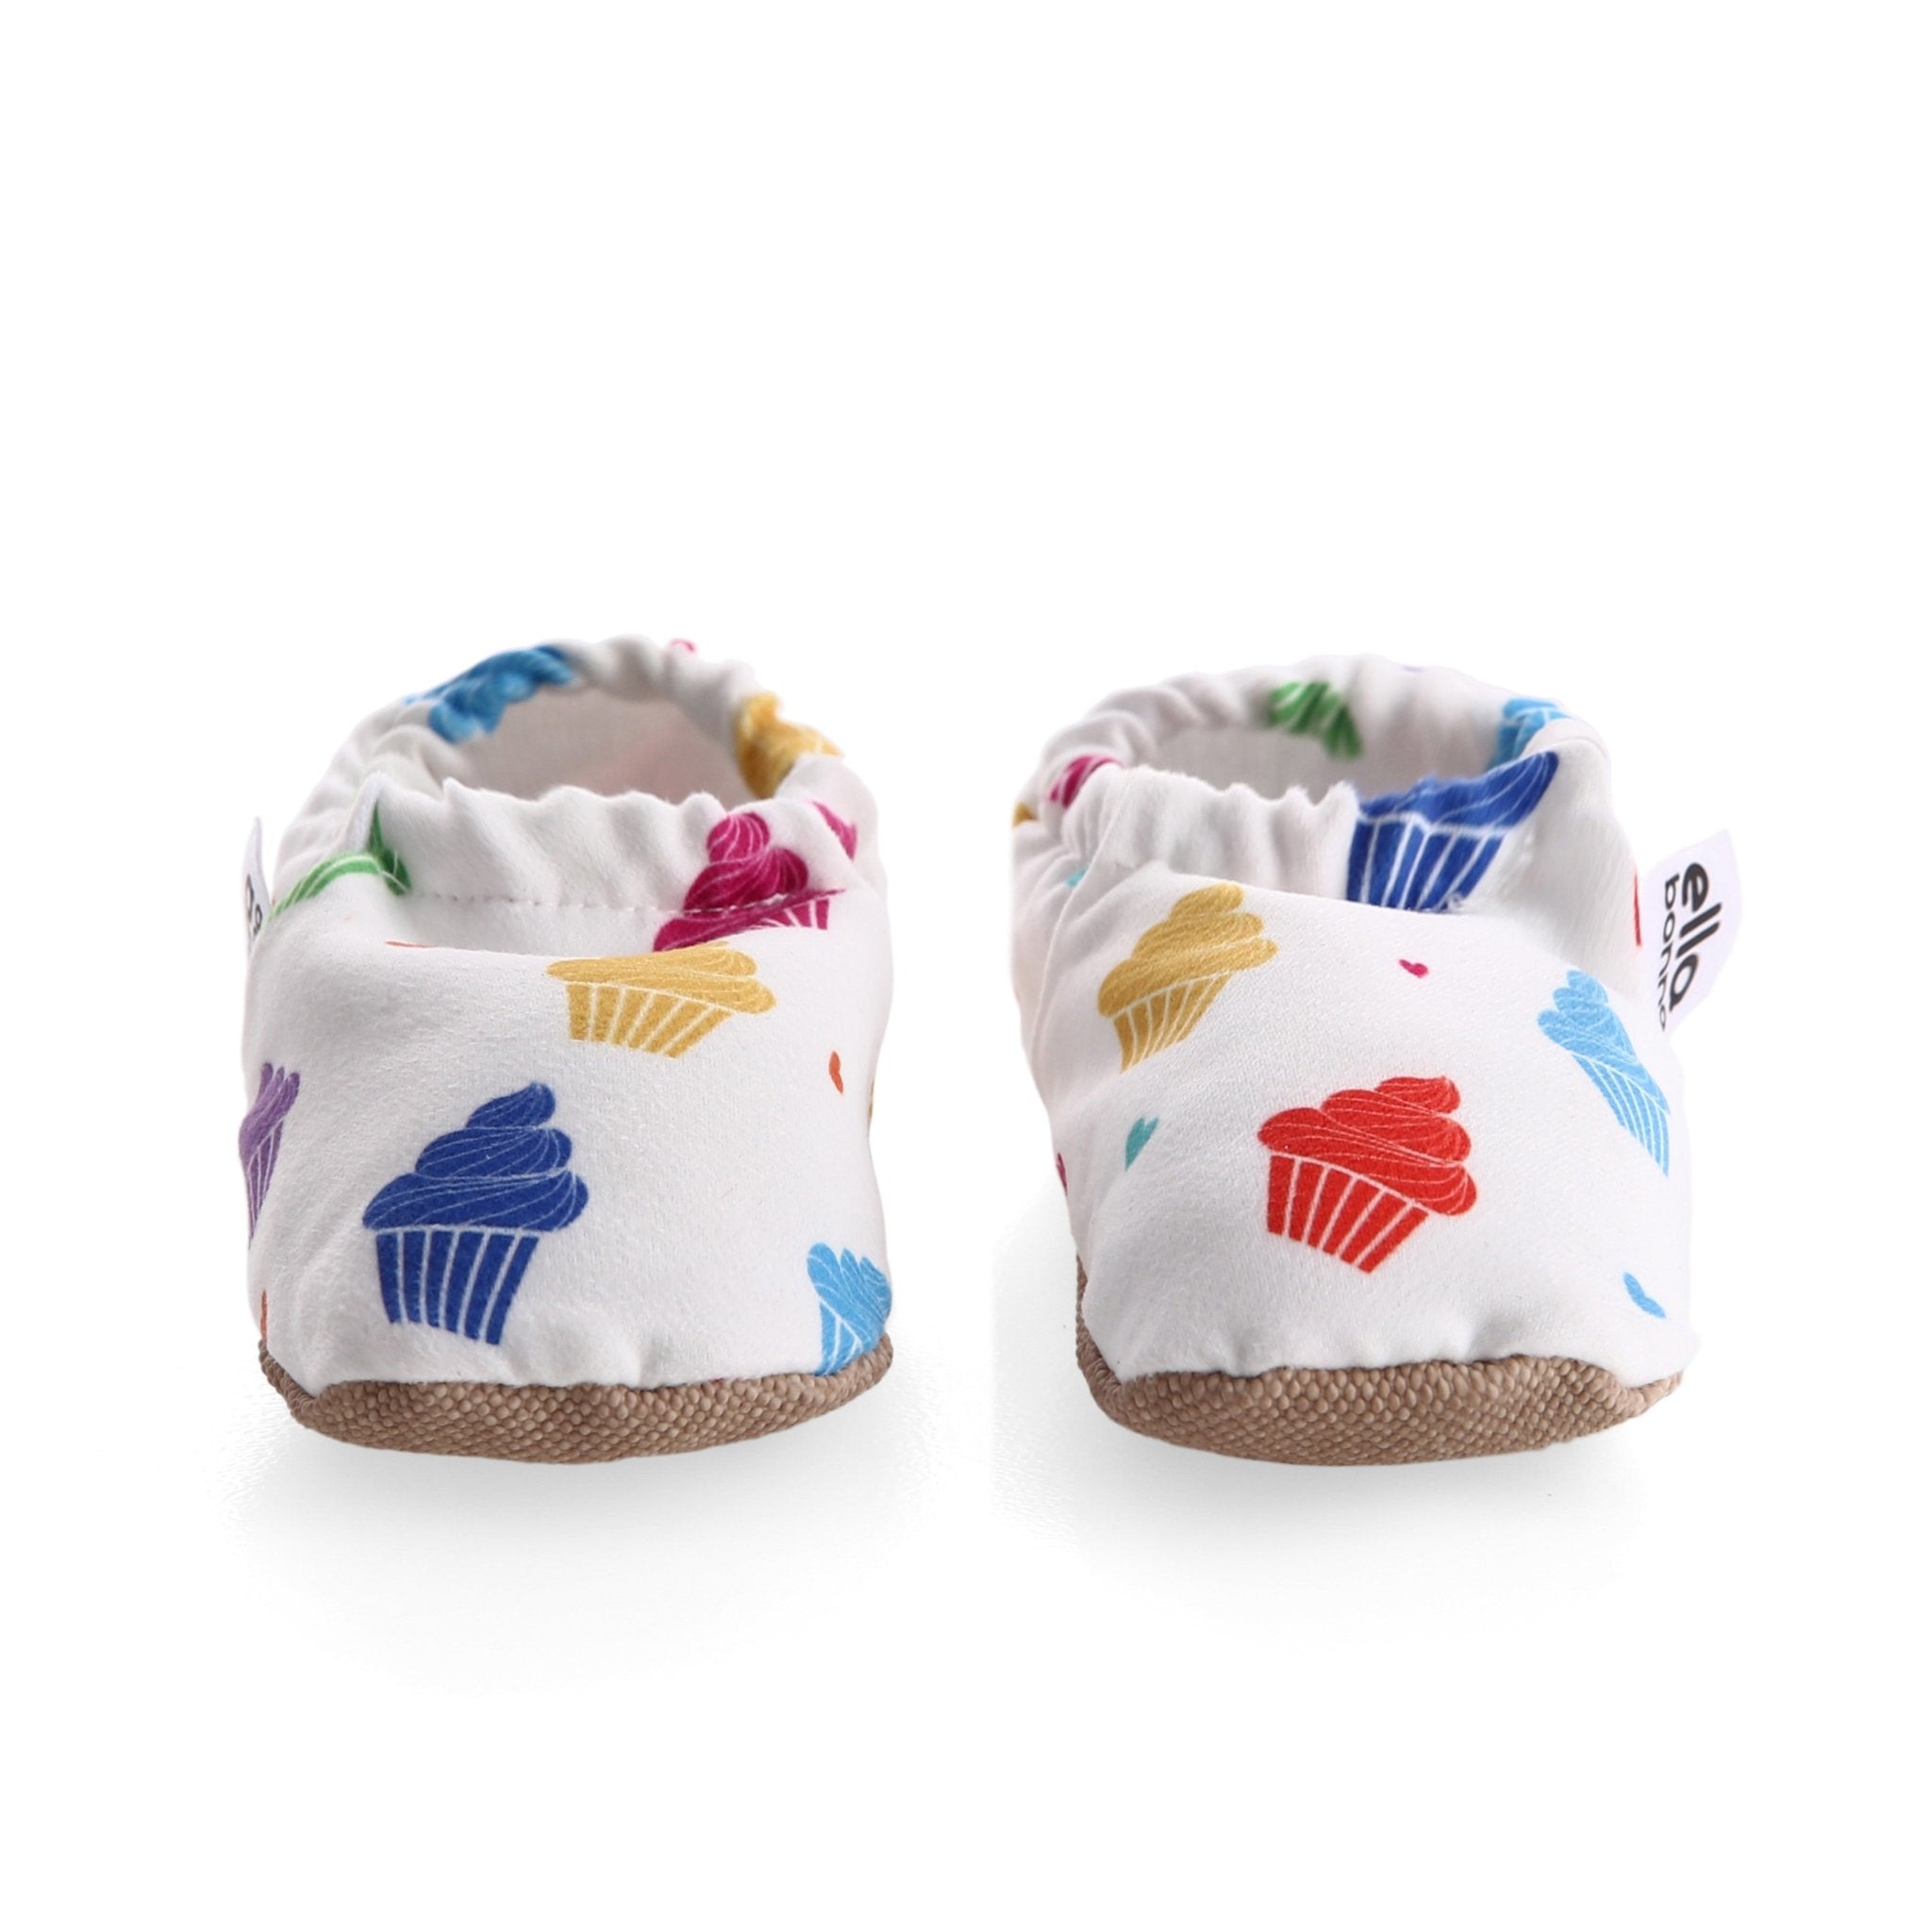 Baby Shoes Stock Photos and Images - 123RF